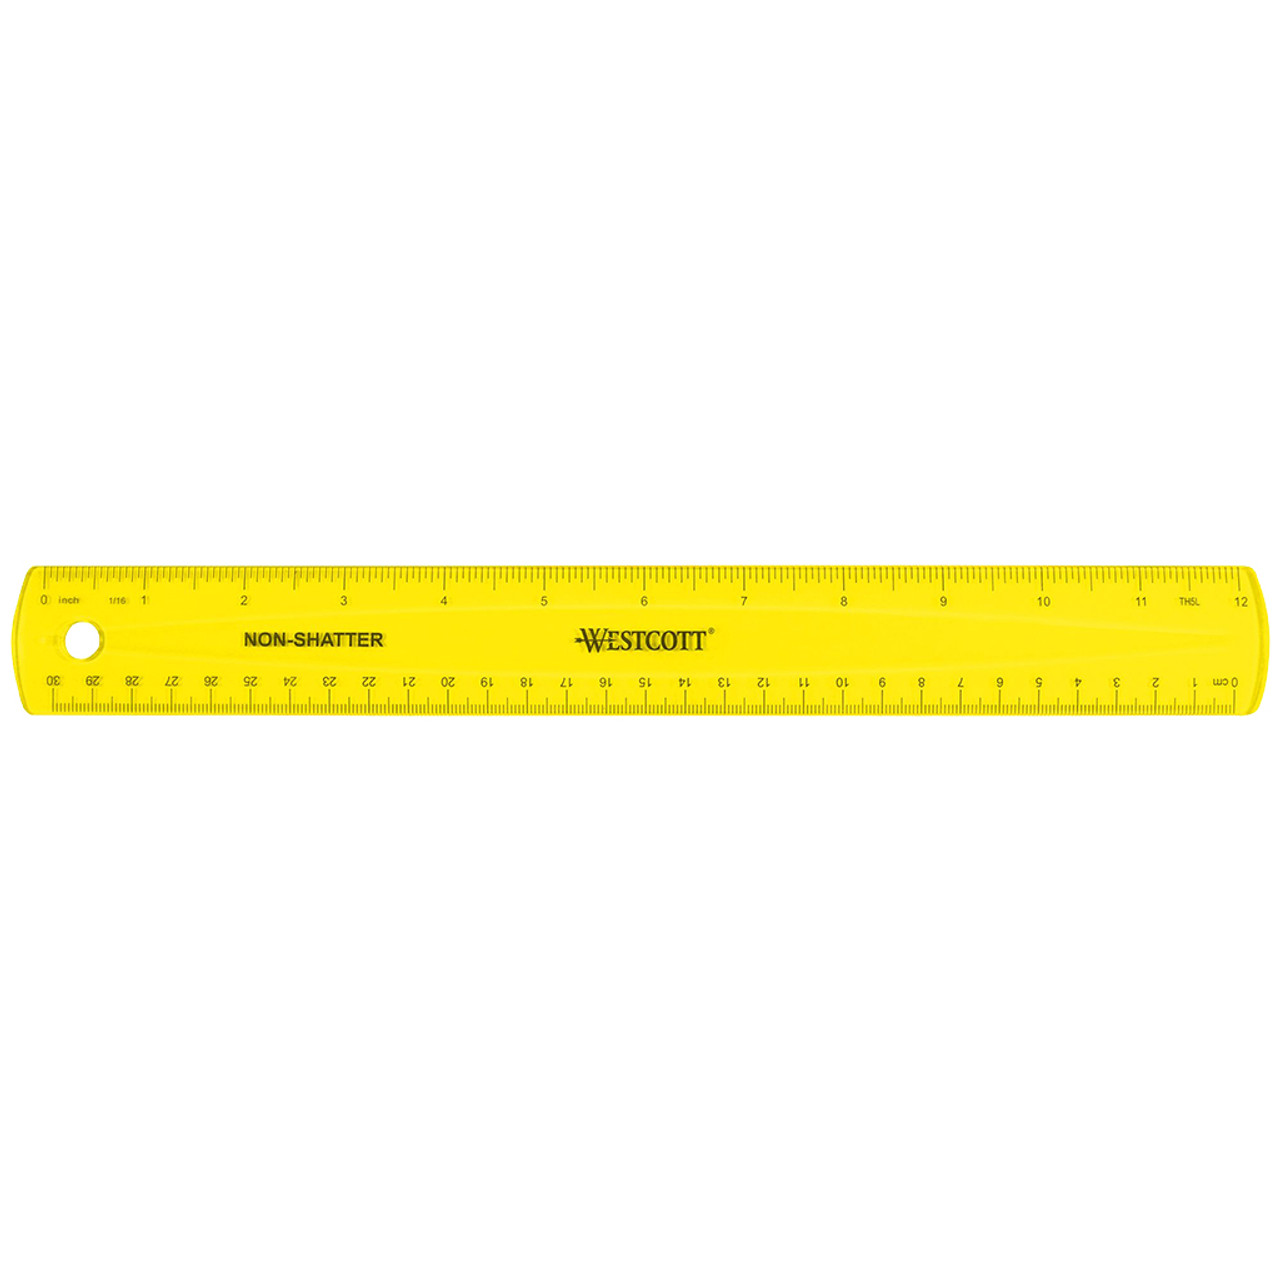 Westcott Translucent Ruler 12 - Midwest Technology Products